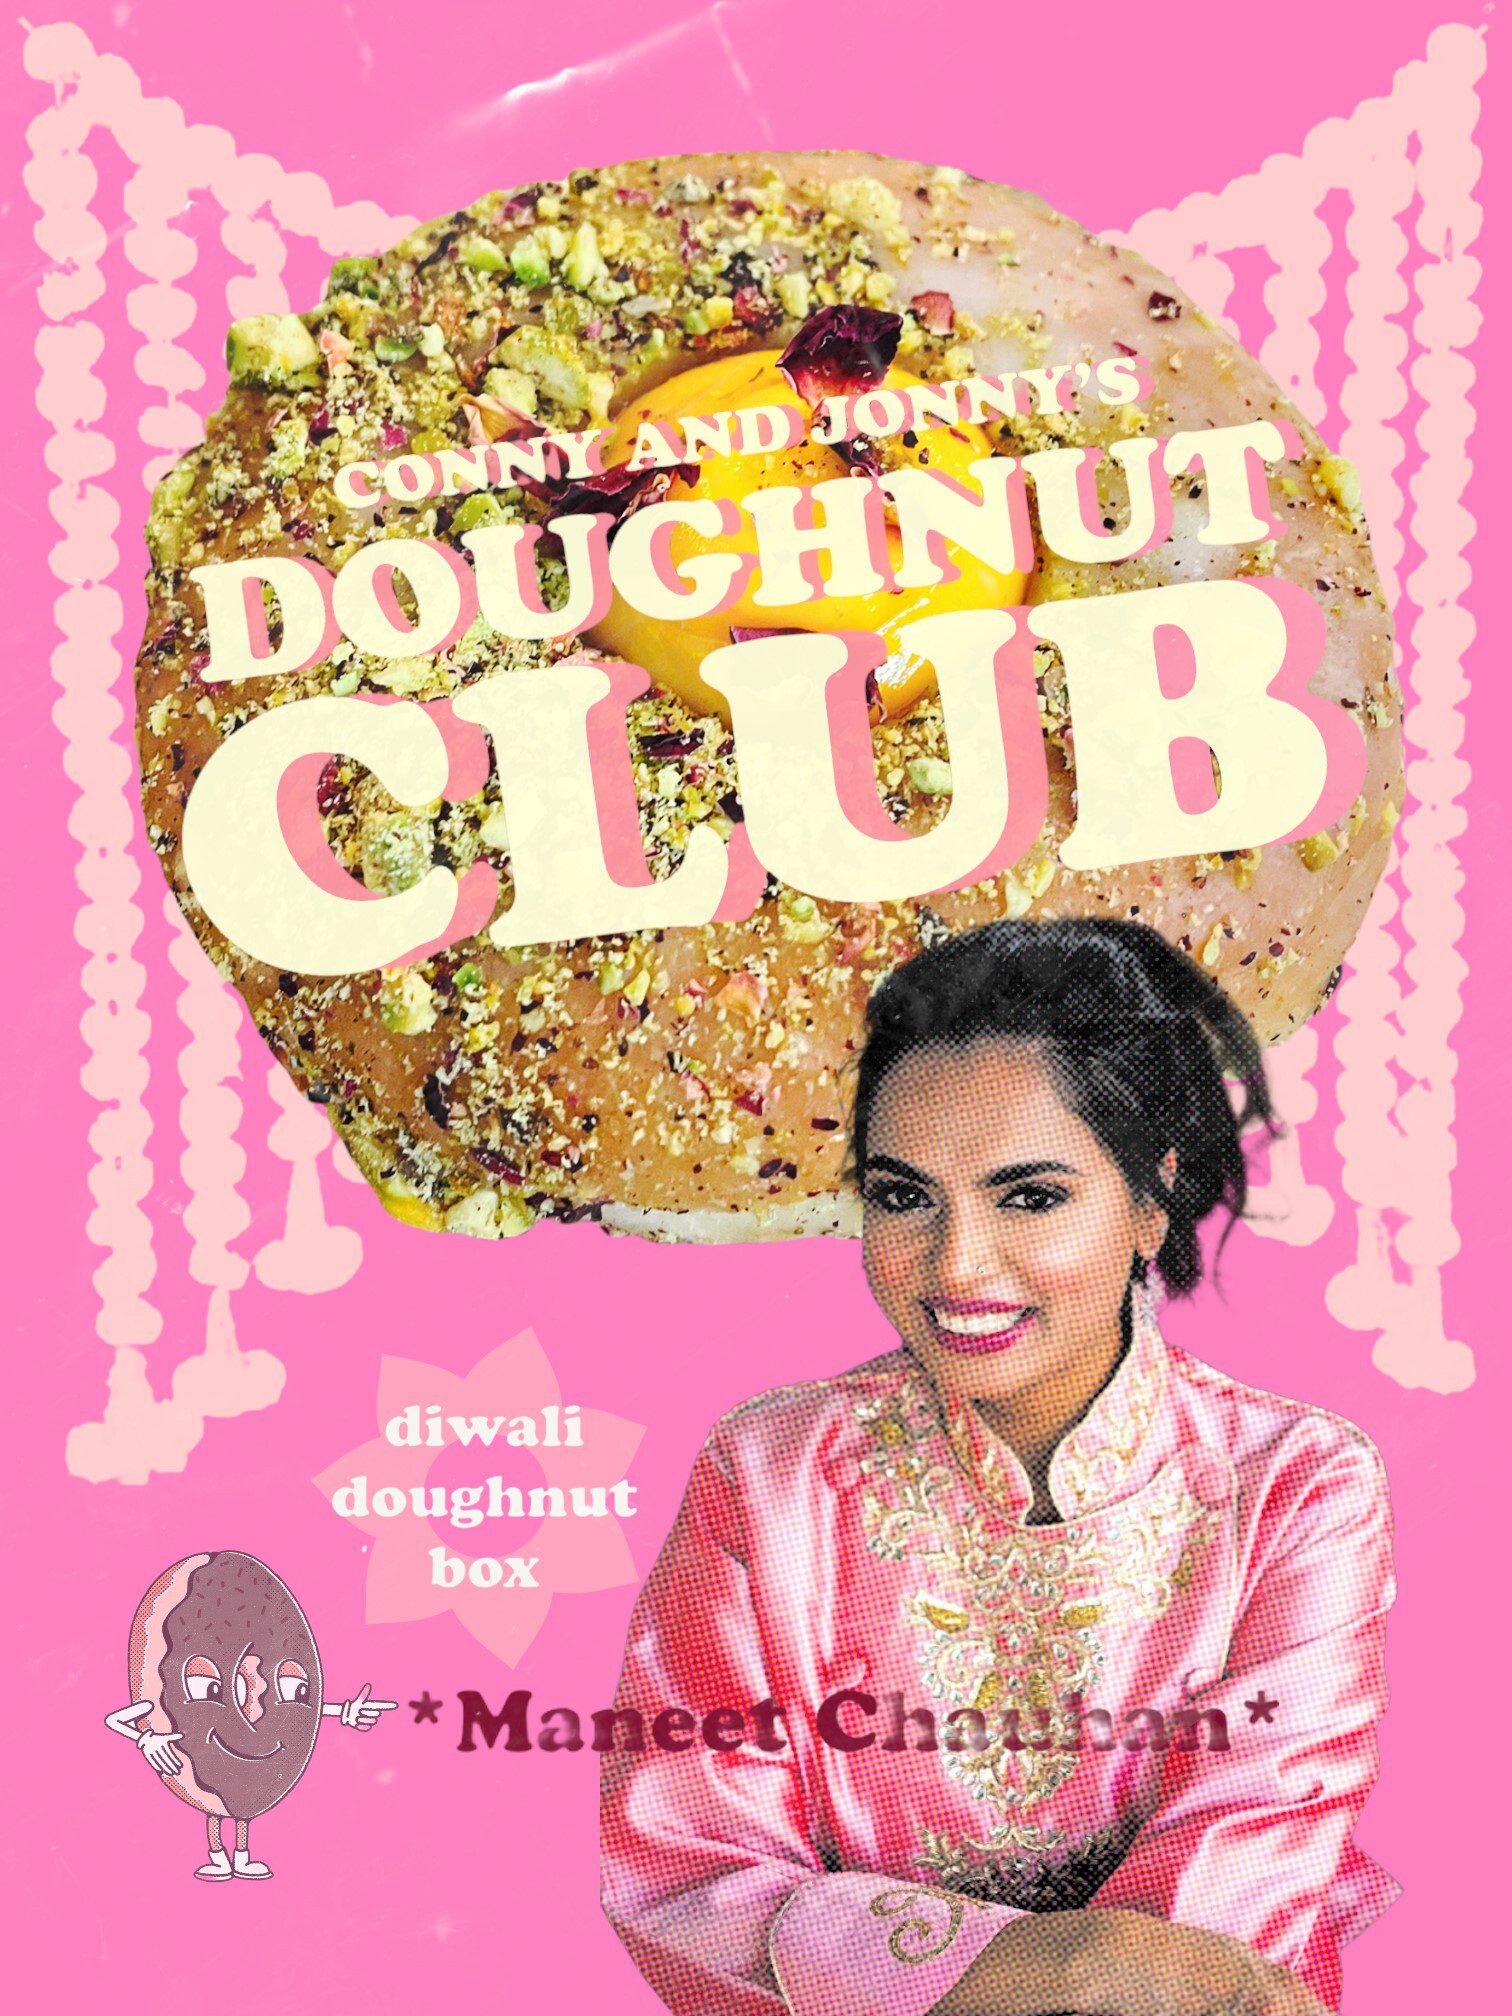 Maneet Chauhan X Conny & Jonny Doughnuts Nashville, Chef Maneet Chauhan and local Nashville favorite Conny & Jonny Doughnuts are excited to announce the release of a Diwali-inspired doughnut collaboration